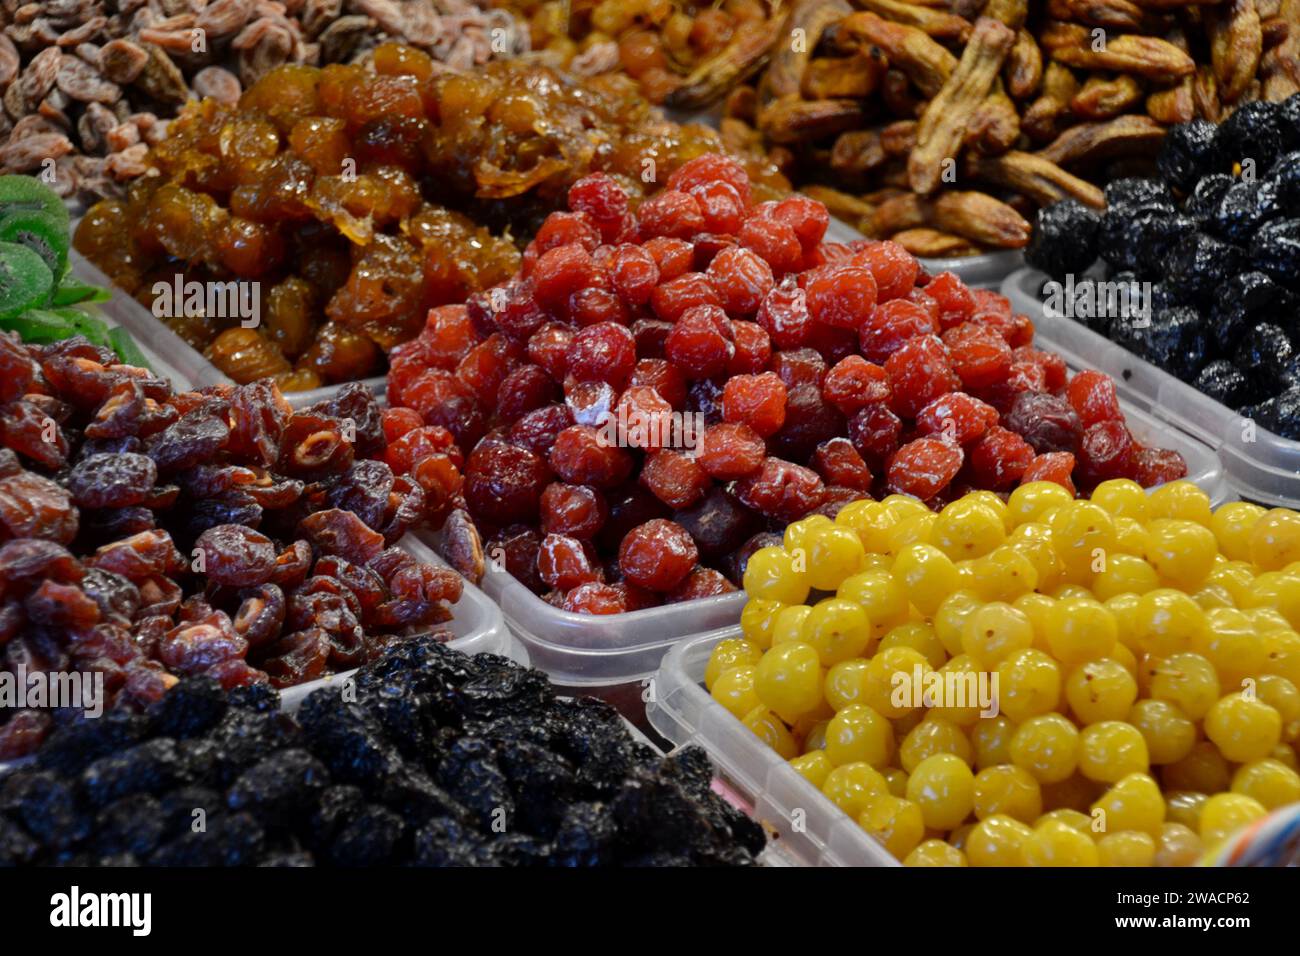 Close up candied fruits sold as desserts by roadside market stall traders in Hanoi, Vietnam include grapes, dates, berries and figs all sugar glazed Stock Photo